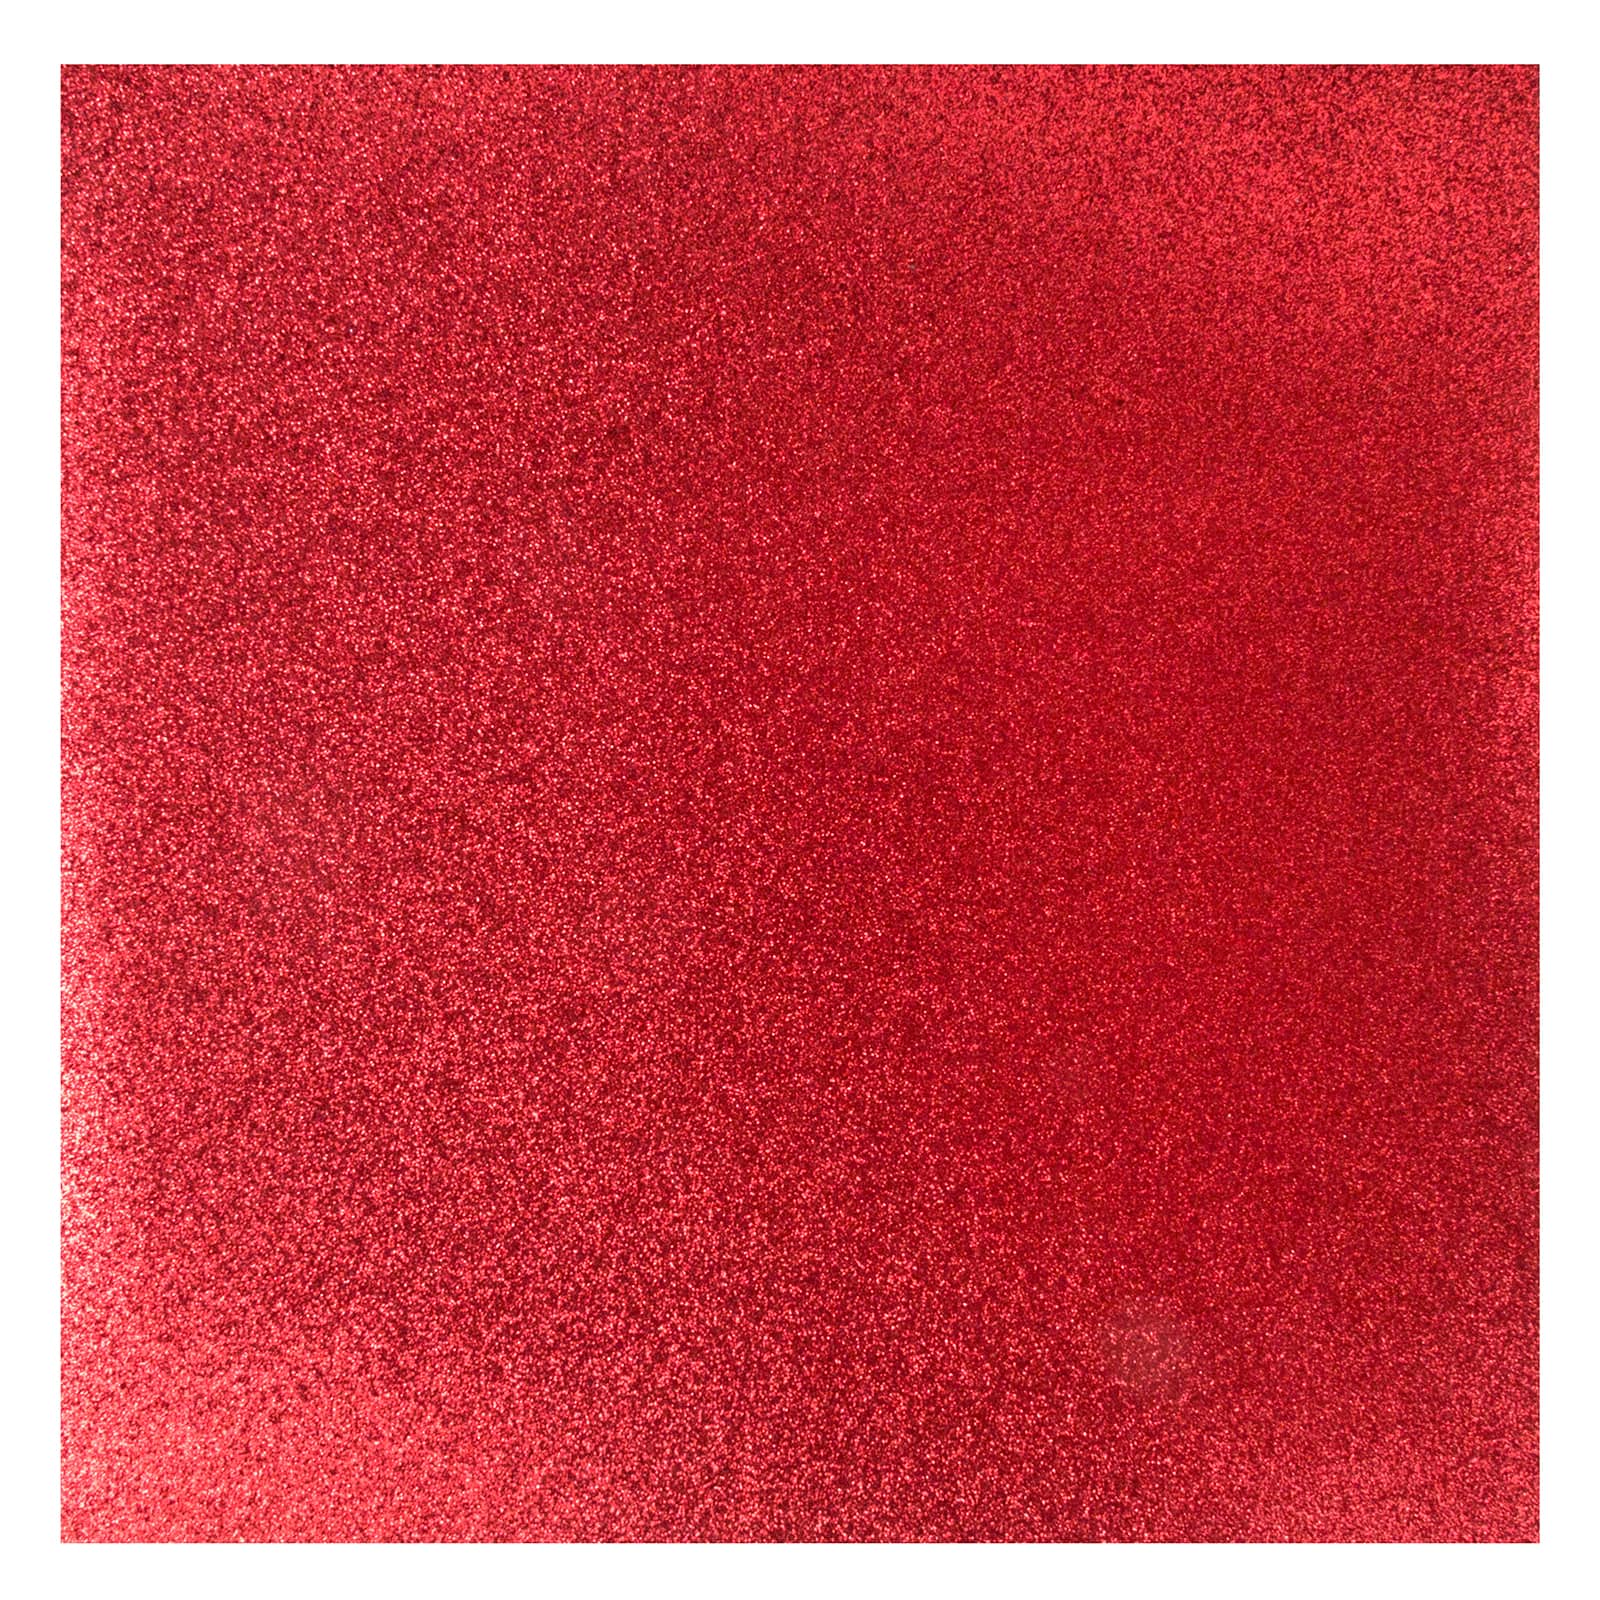 Best Creation 12-Inch by 12-Inch Glitter Cardstock, Wine Red